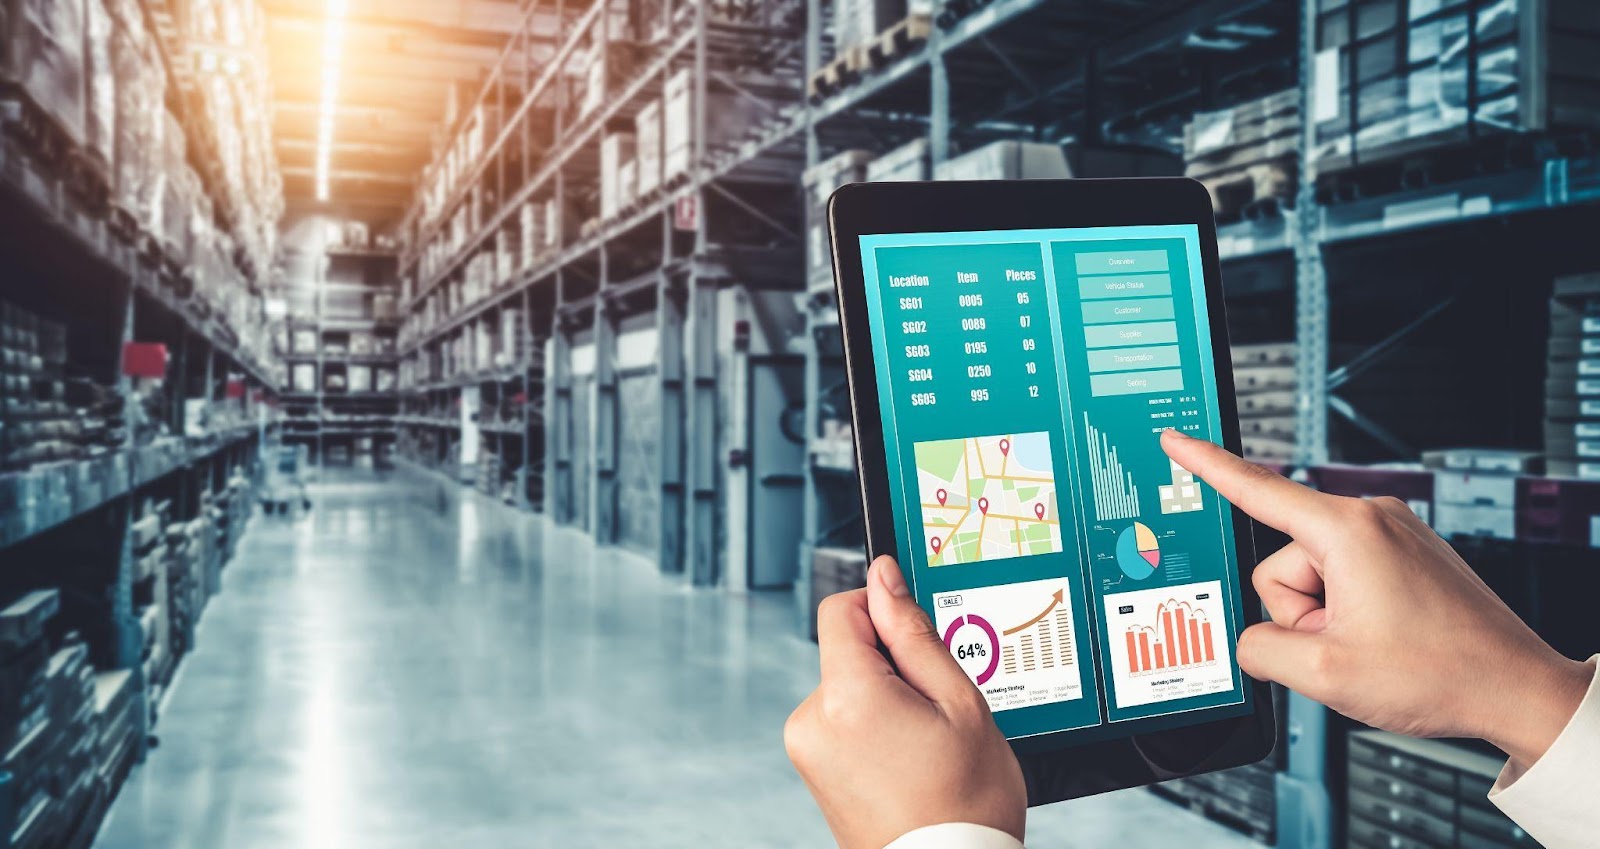 Warehouse Inventory Management Systems: Building A System For Your Warehouse